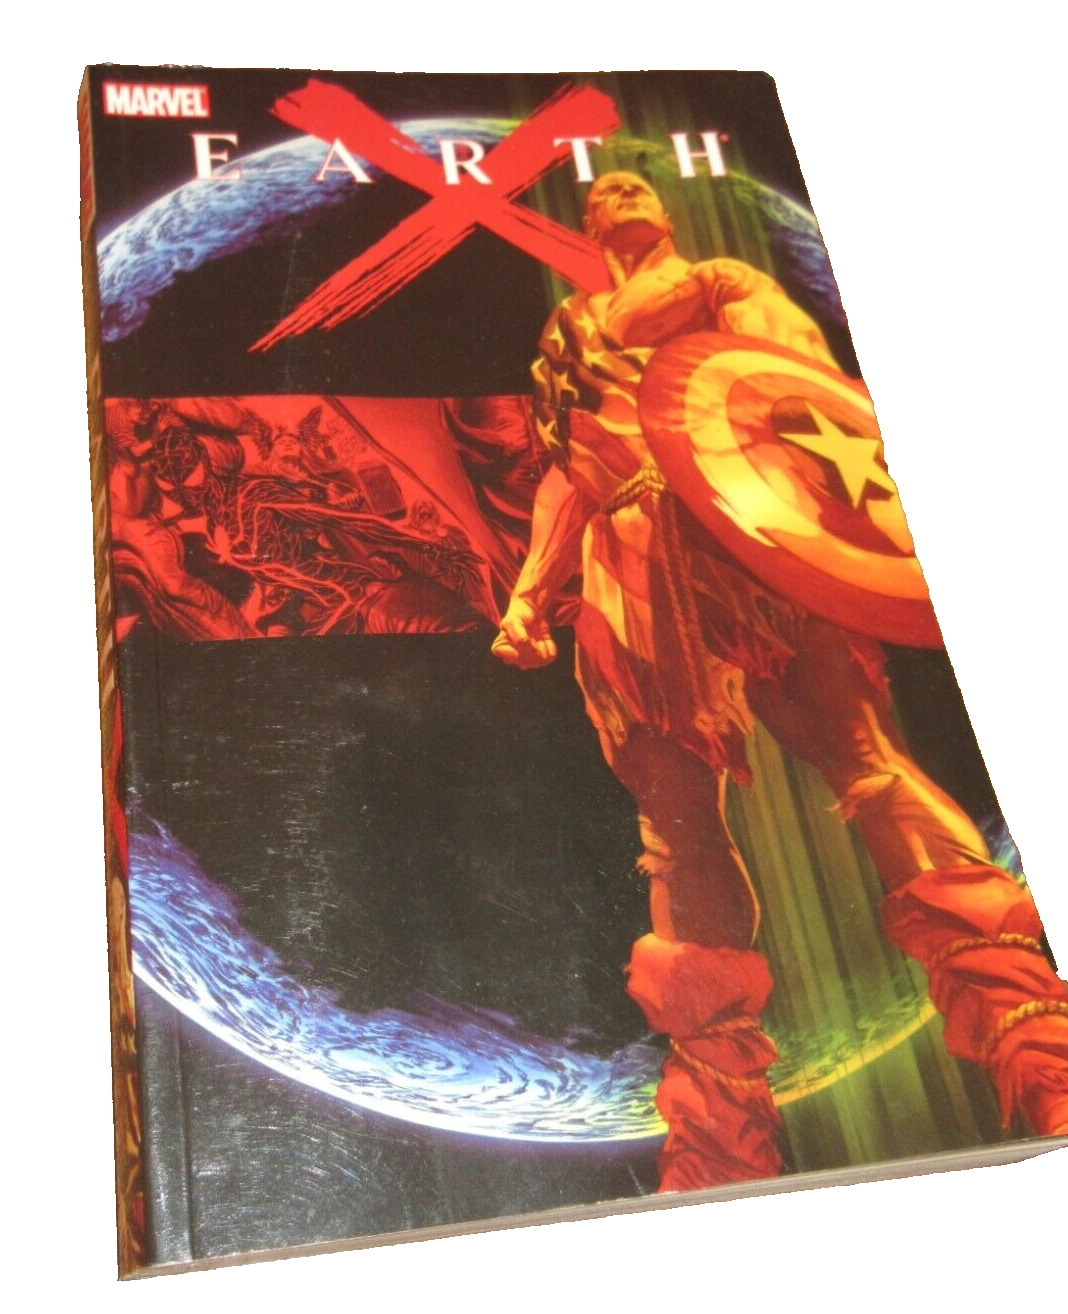 Marvel Earth X 2006 TPB 1st Print 2nd Edition Alex Ross Cover & Story